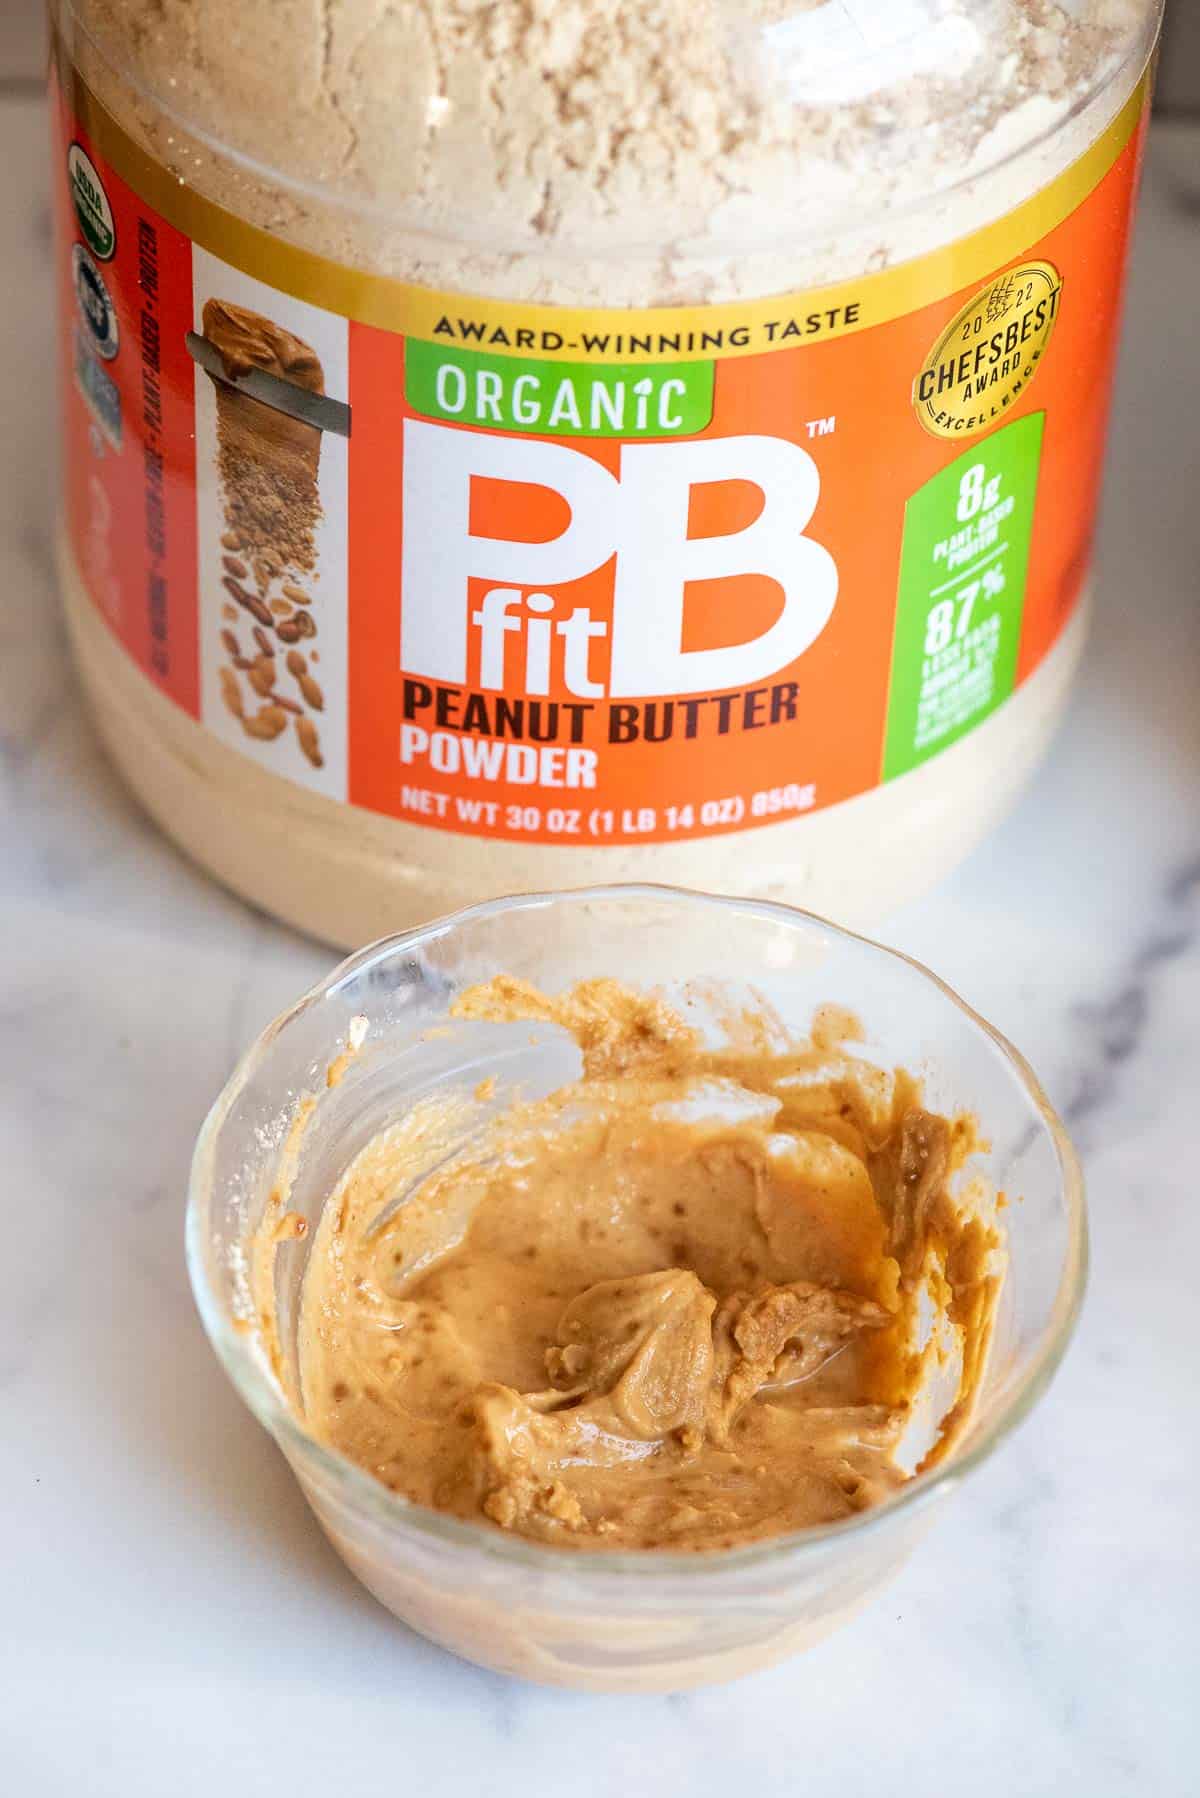 pbfit made into peanut butter.